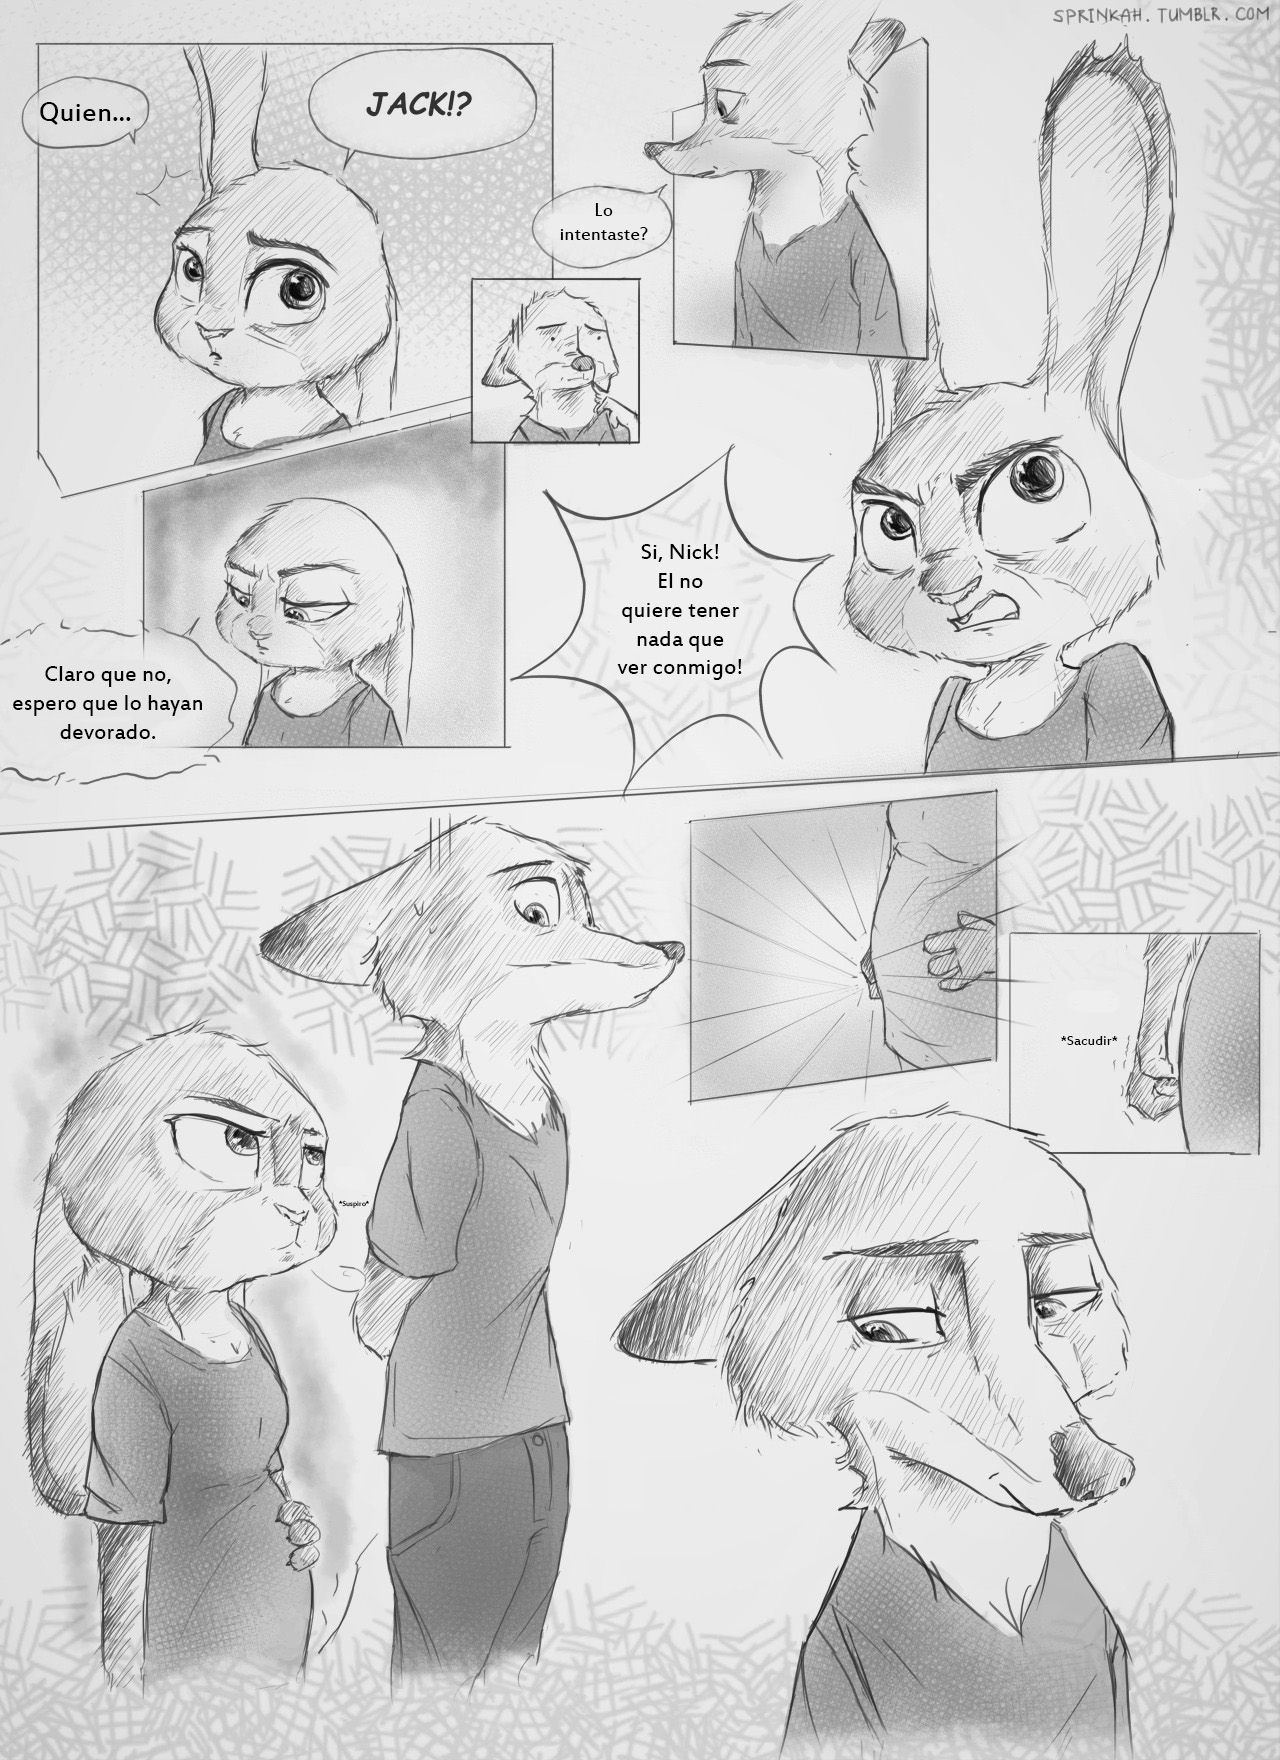 [Sprinkah] This is what true love looks like (Zootopia) (Spanish) (On Going) [Landsec] http://sprinkah.tumblr.com/ 9